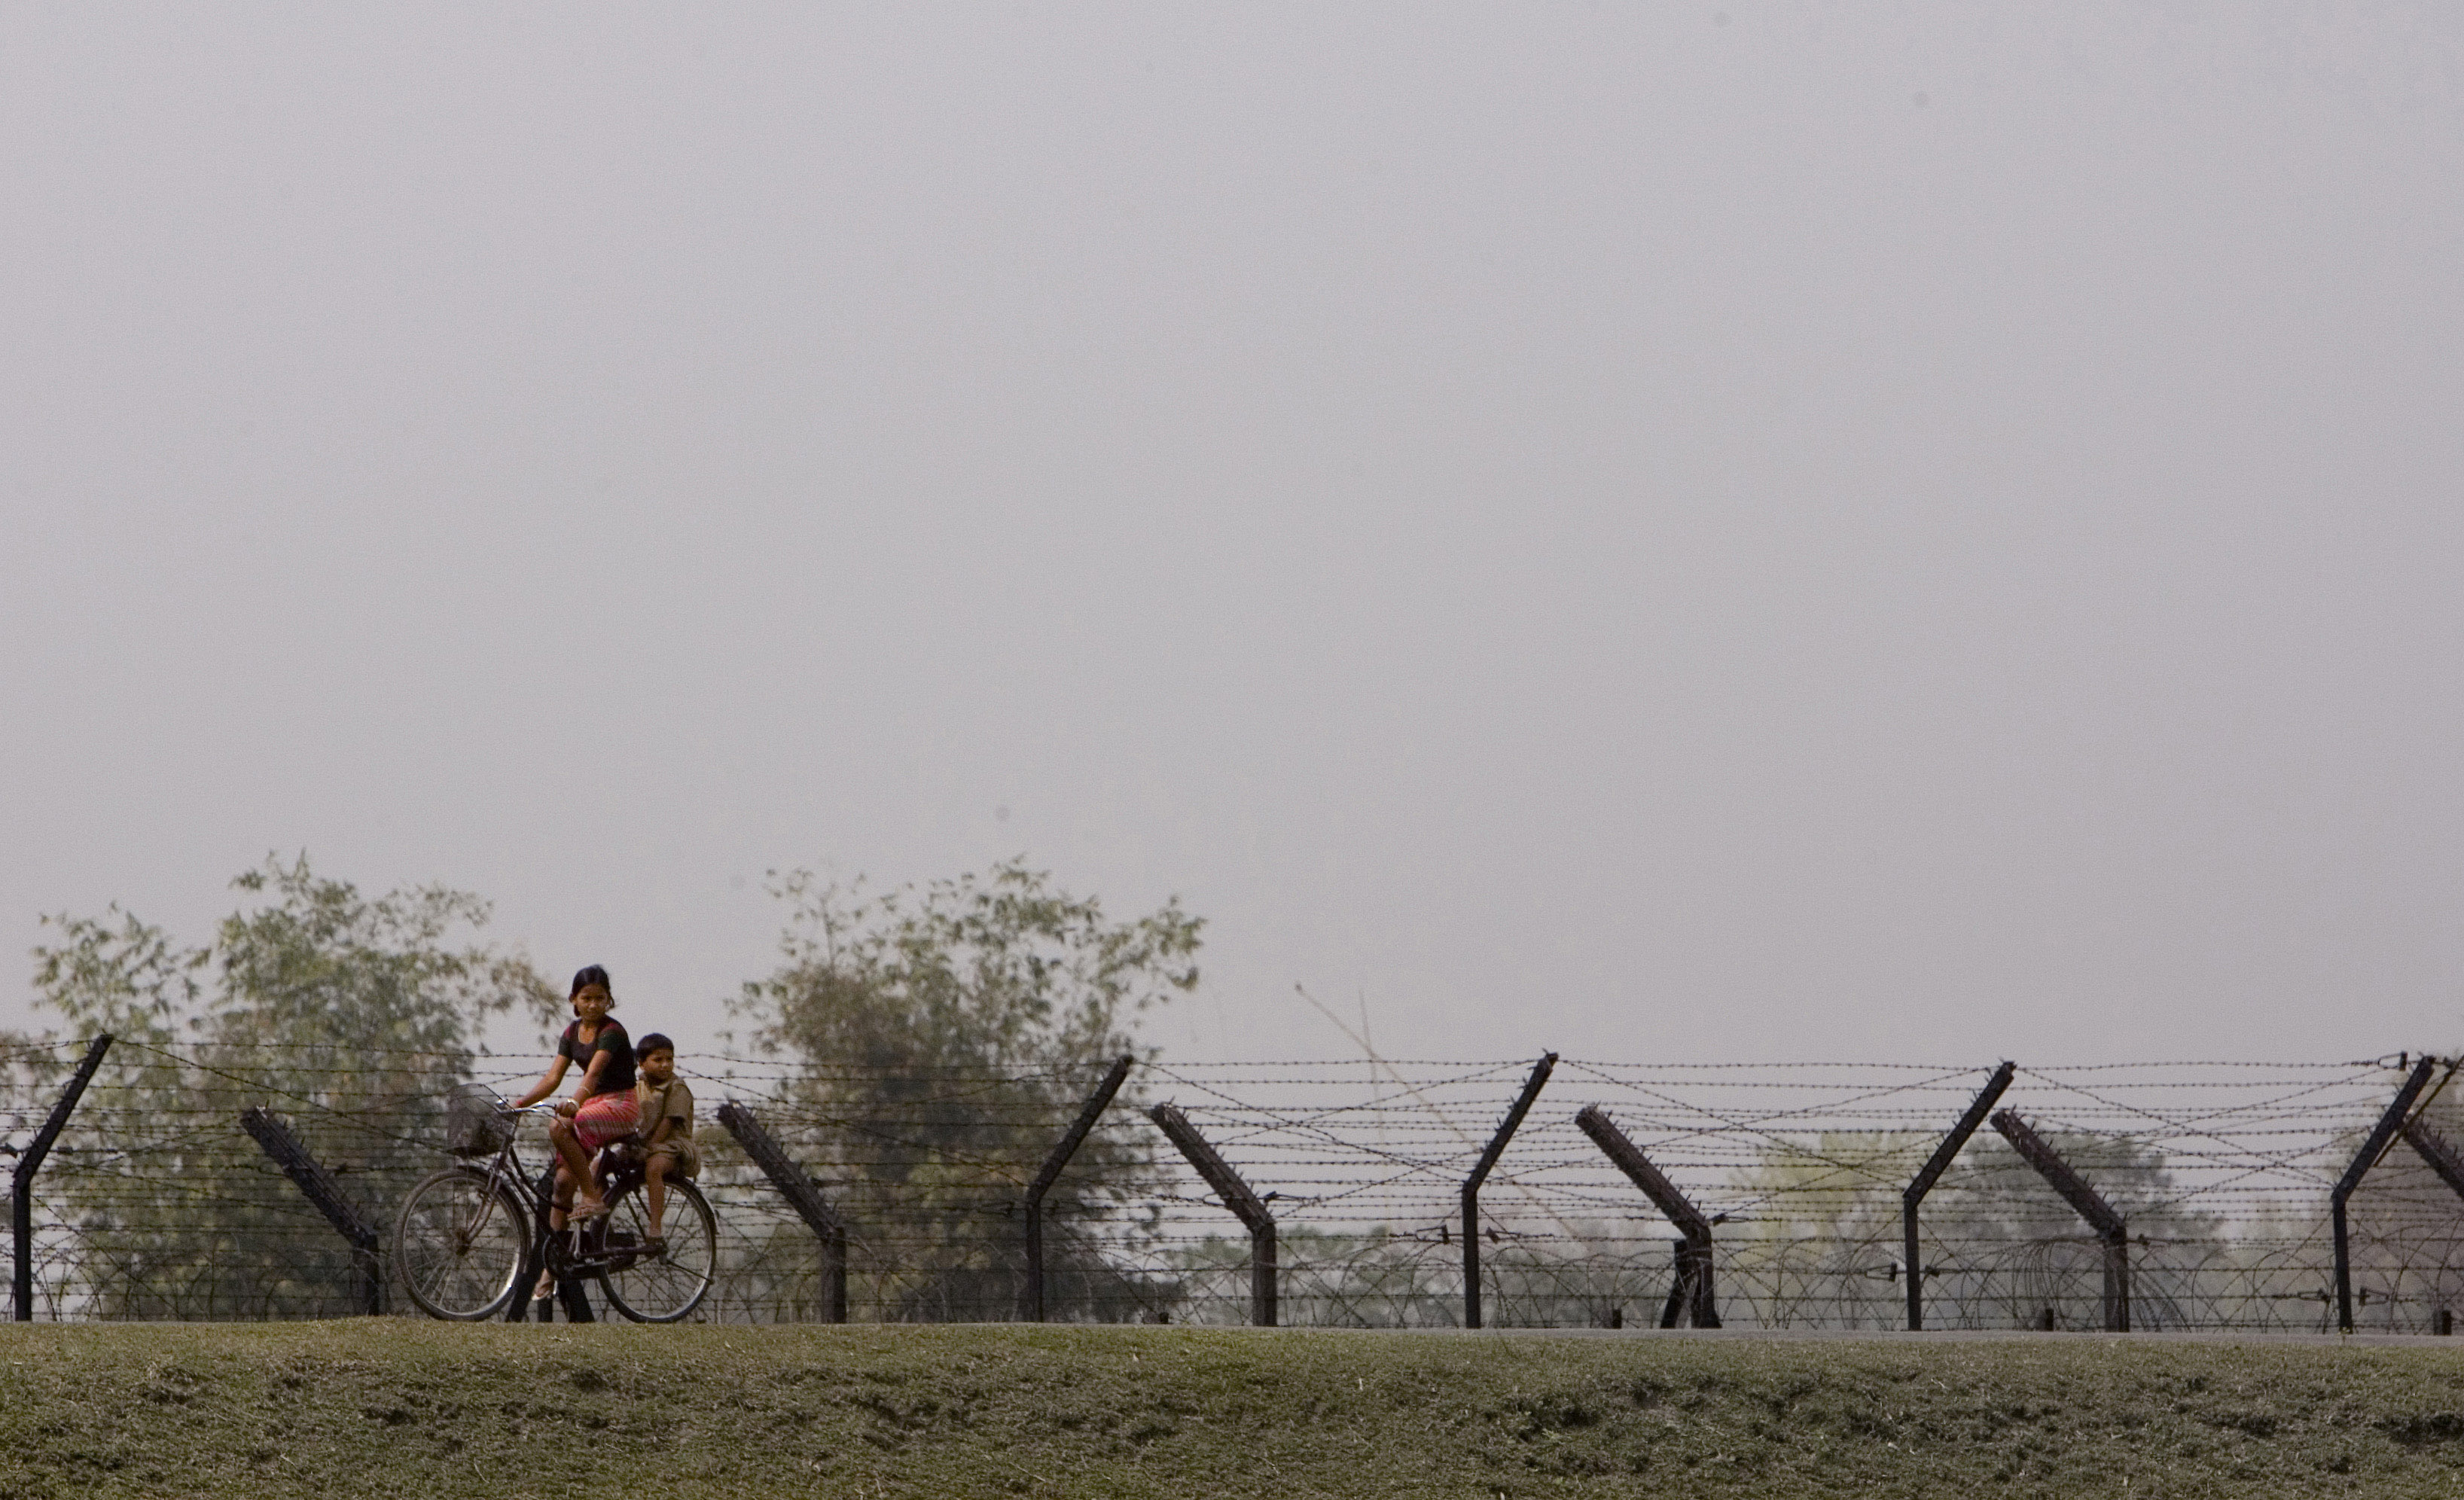 Children bike past a fence separating India from Bangladesh in February 2007. The two countries share a 2,545-mile long border, some three-quarters of which has been fenced off in recent years as the Indian government looks to crack down on migration. 